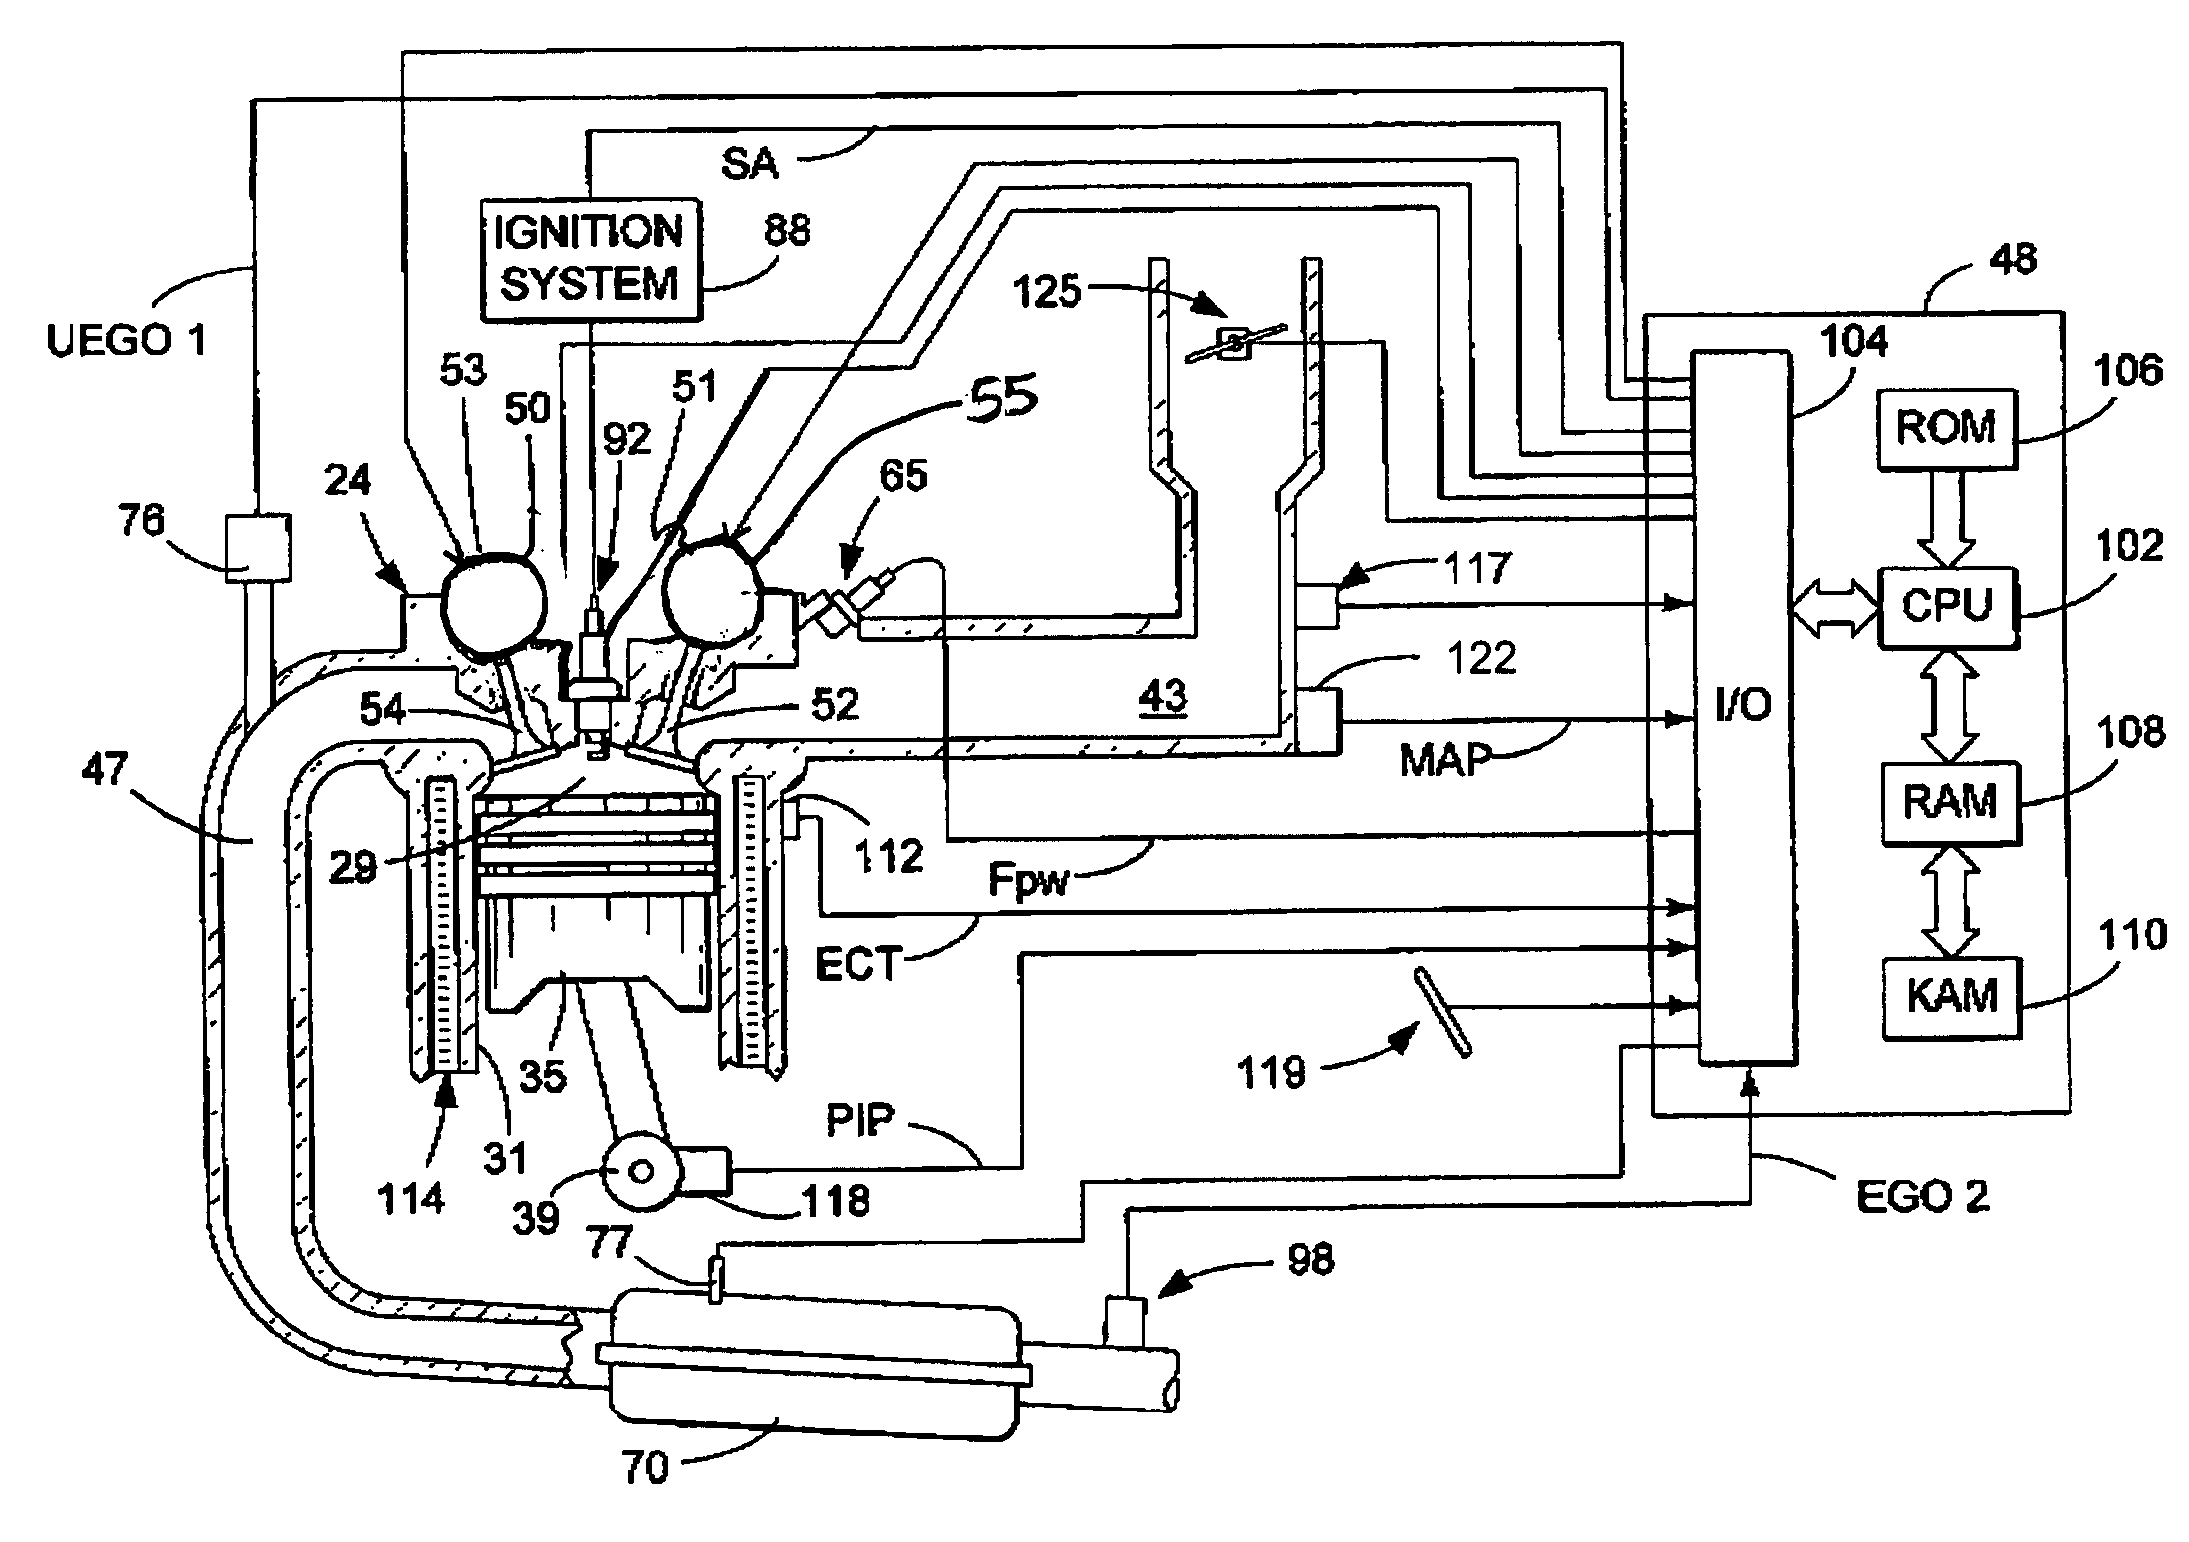 HEV internal combustion engine pre-positioning